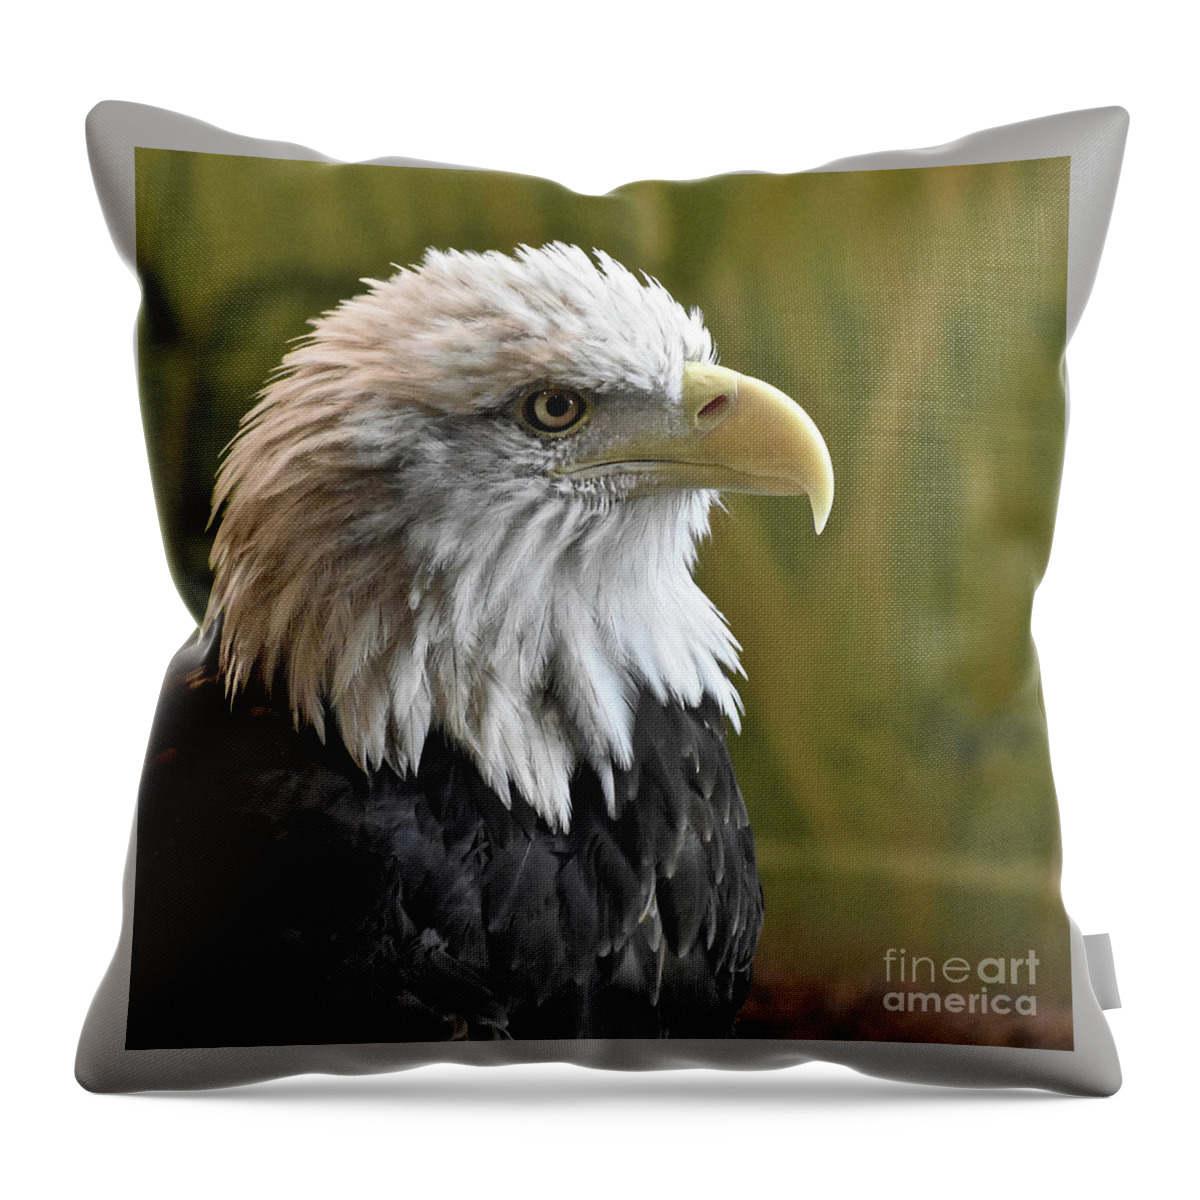 Olympia Throw Pillow featuring the photograph Olympia by Ron Long